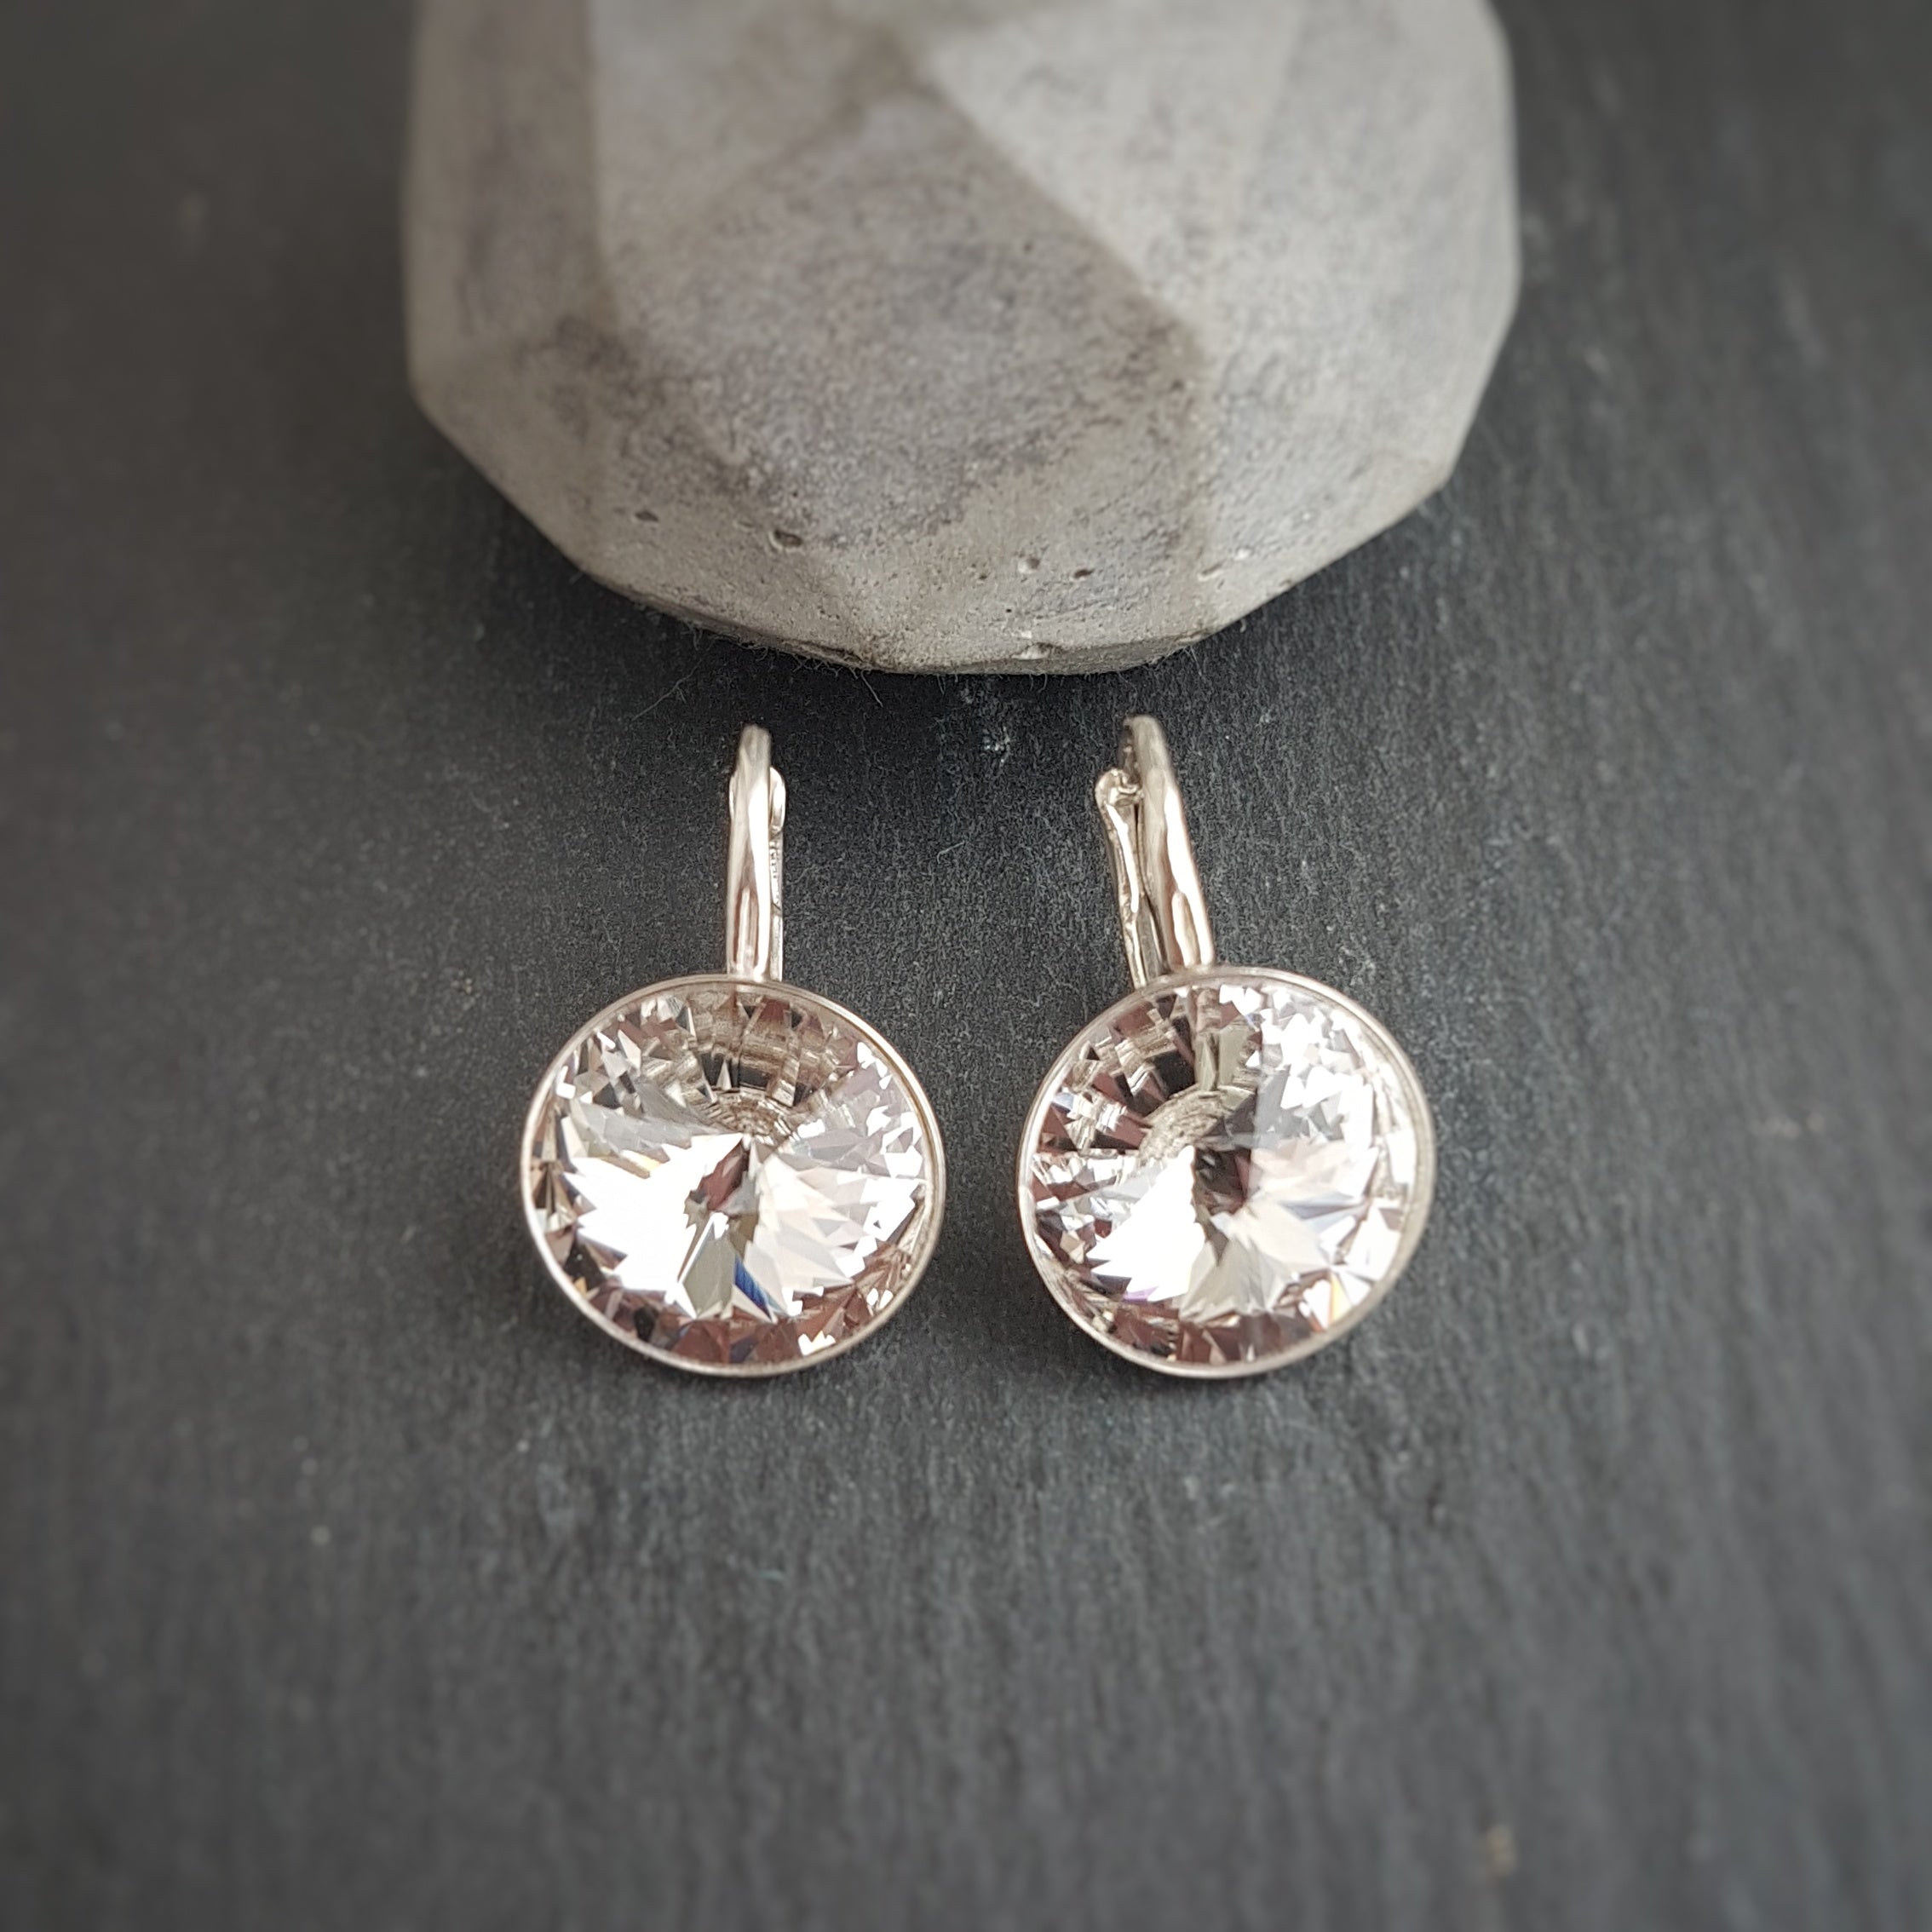 Silver Earrings with 14mm Round Crystals - Personalised Sterling Silver Jewellery Ireland. Birthstone necklace. Shop Local Ireland - Ireland